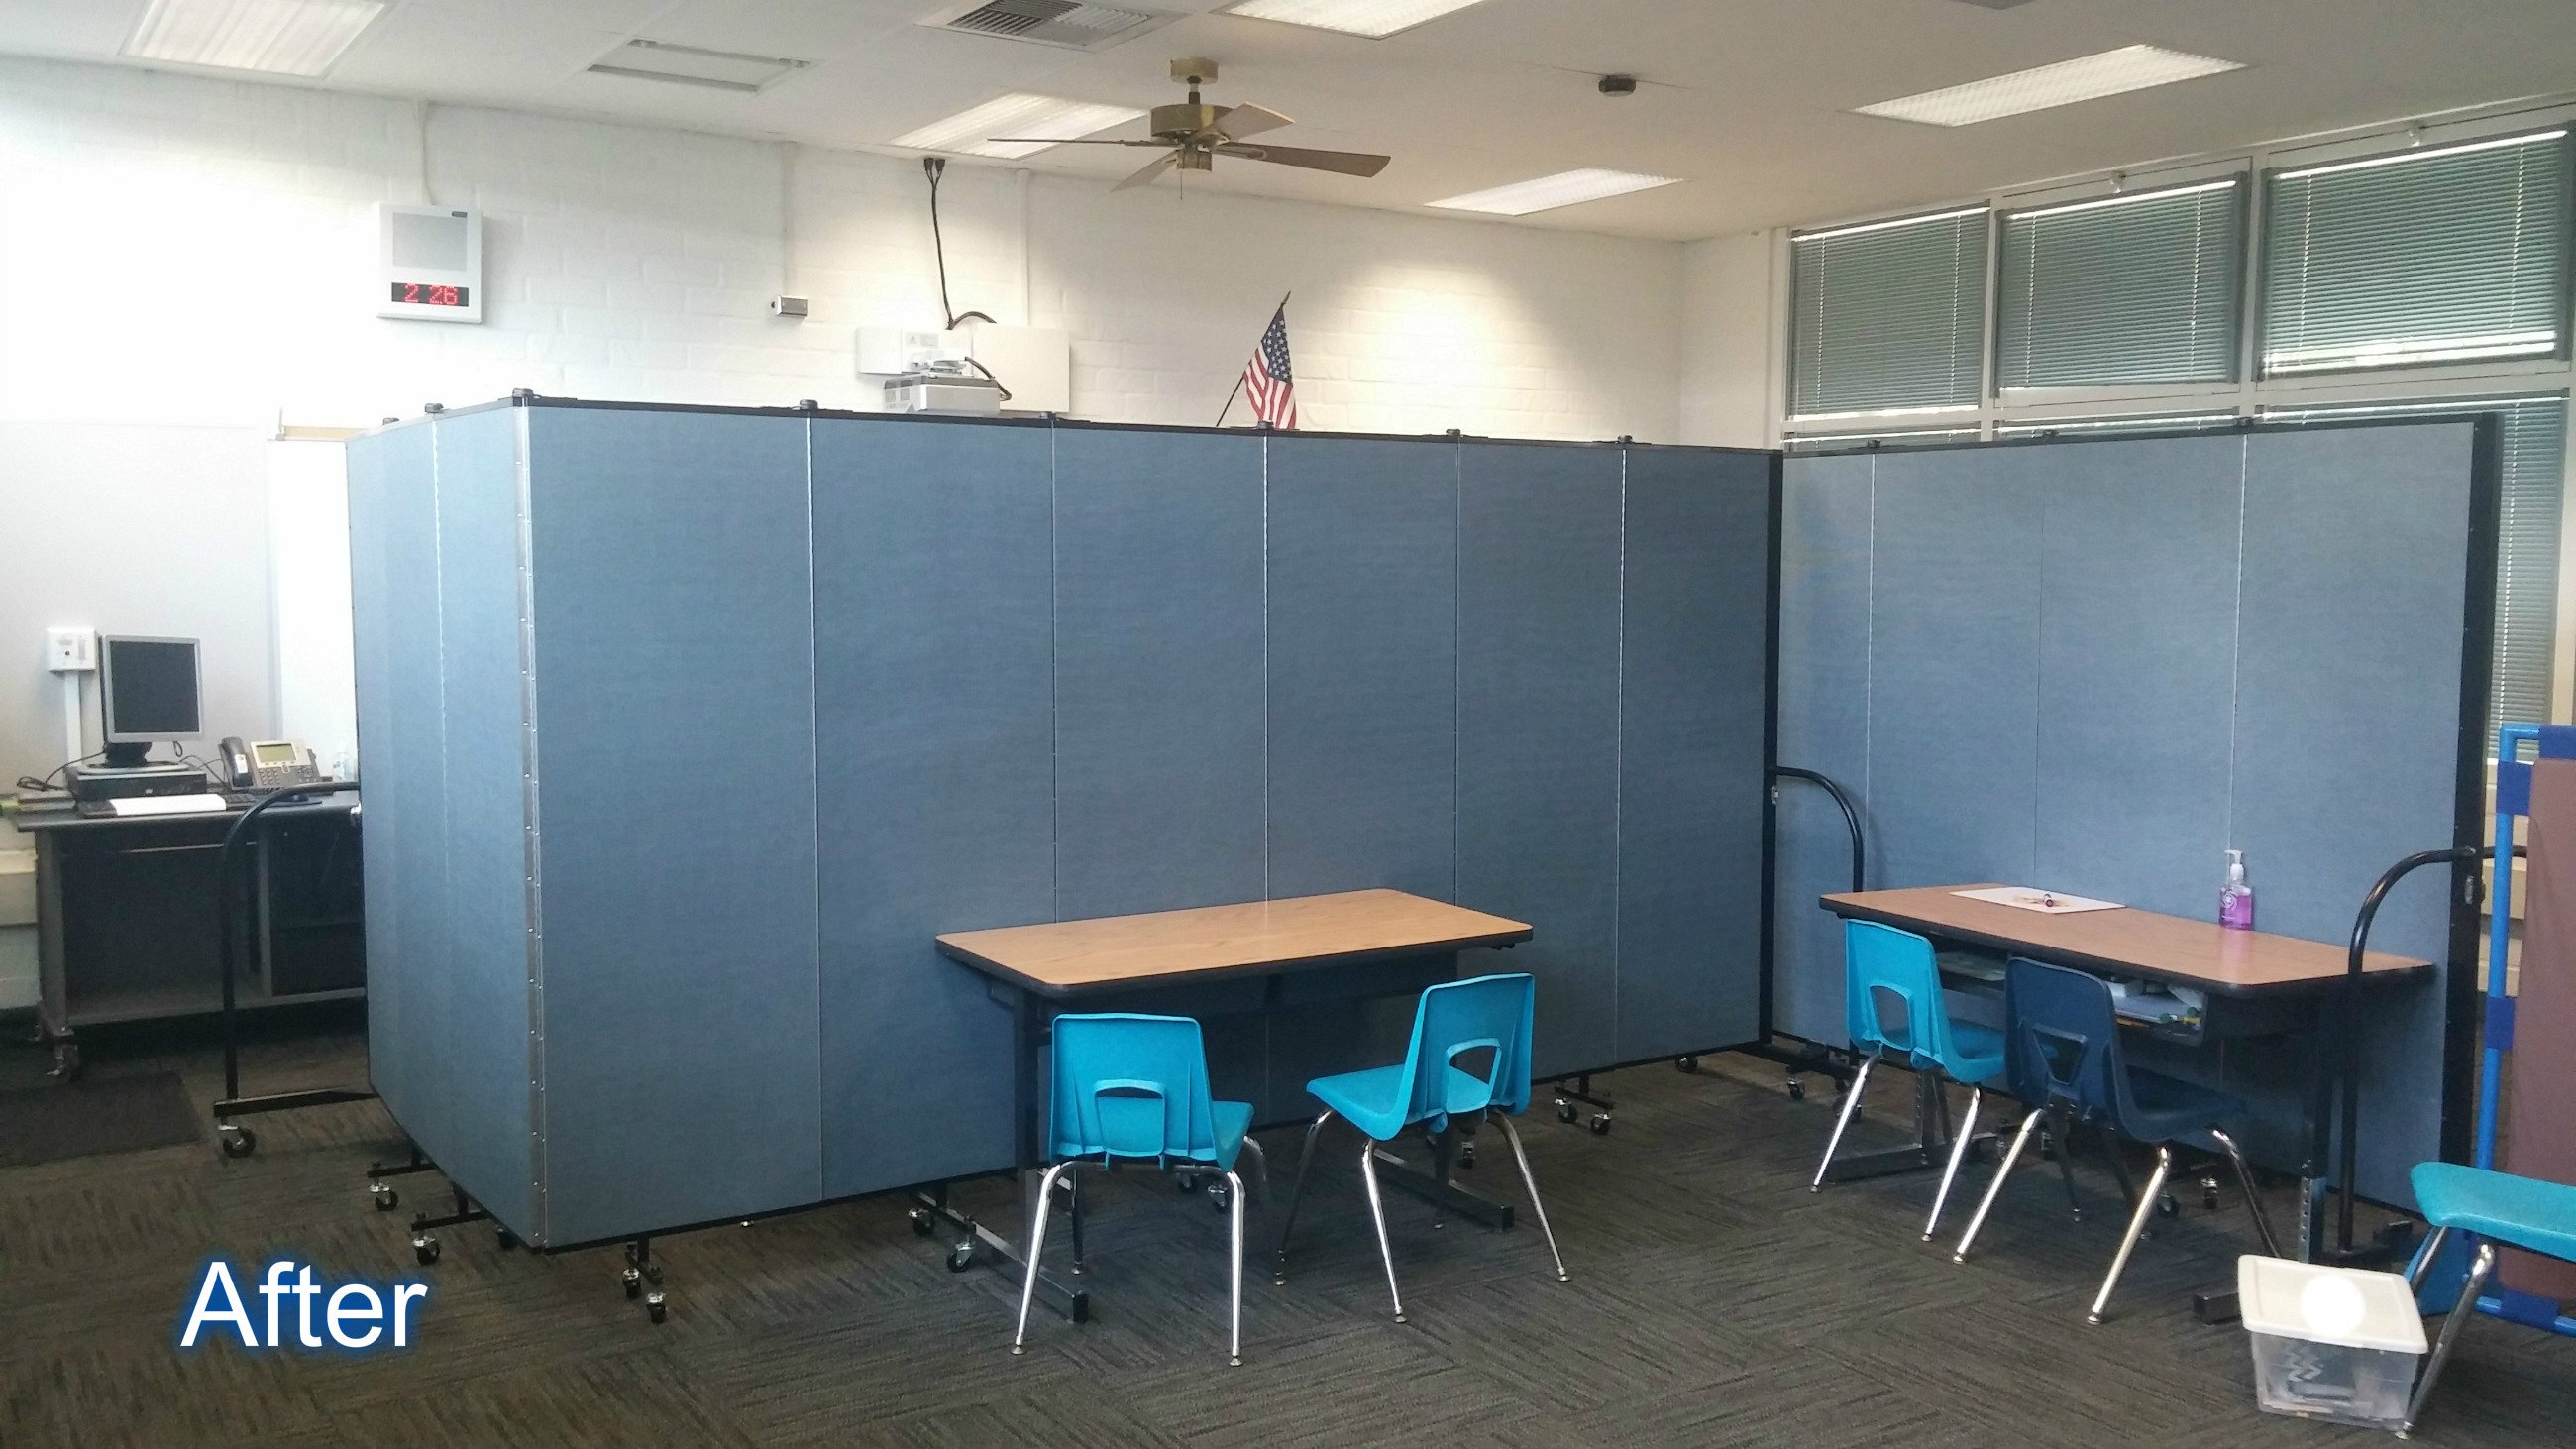 Room dividers create a smaller room within a larger classroom